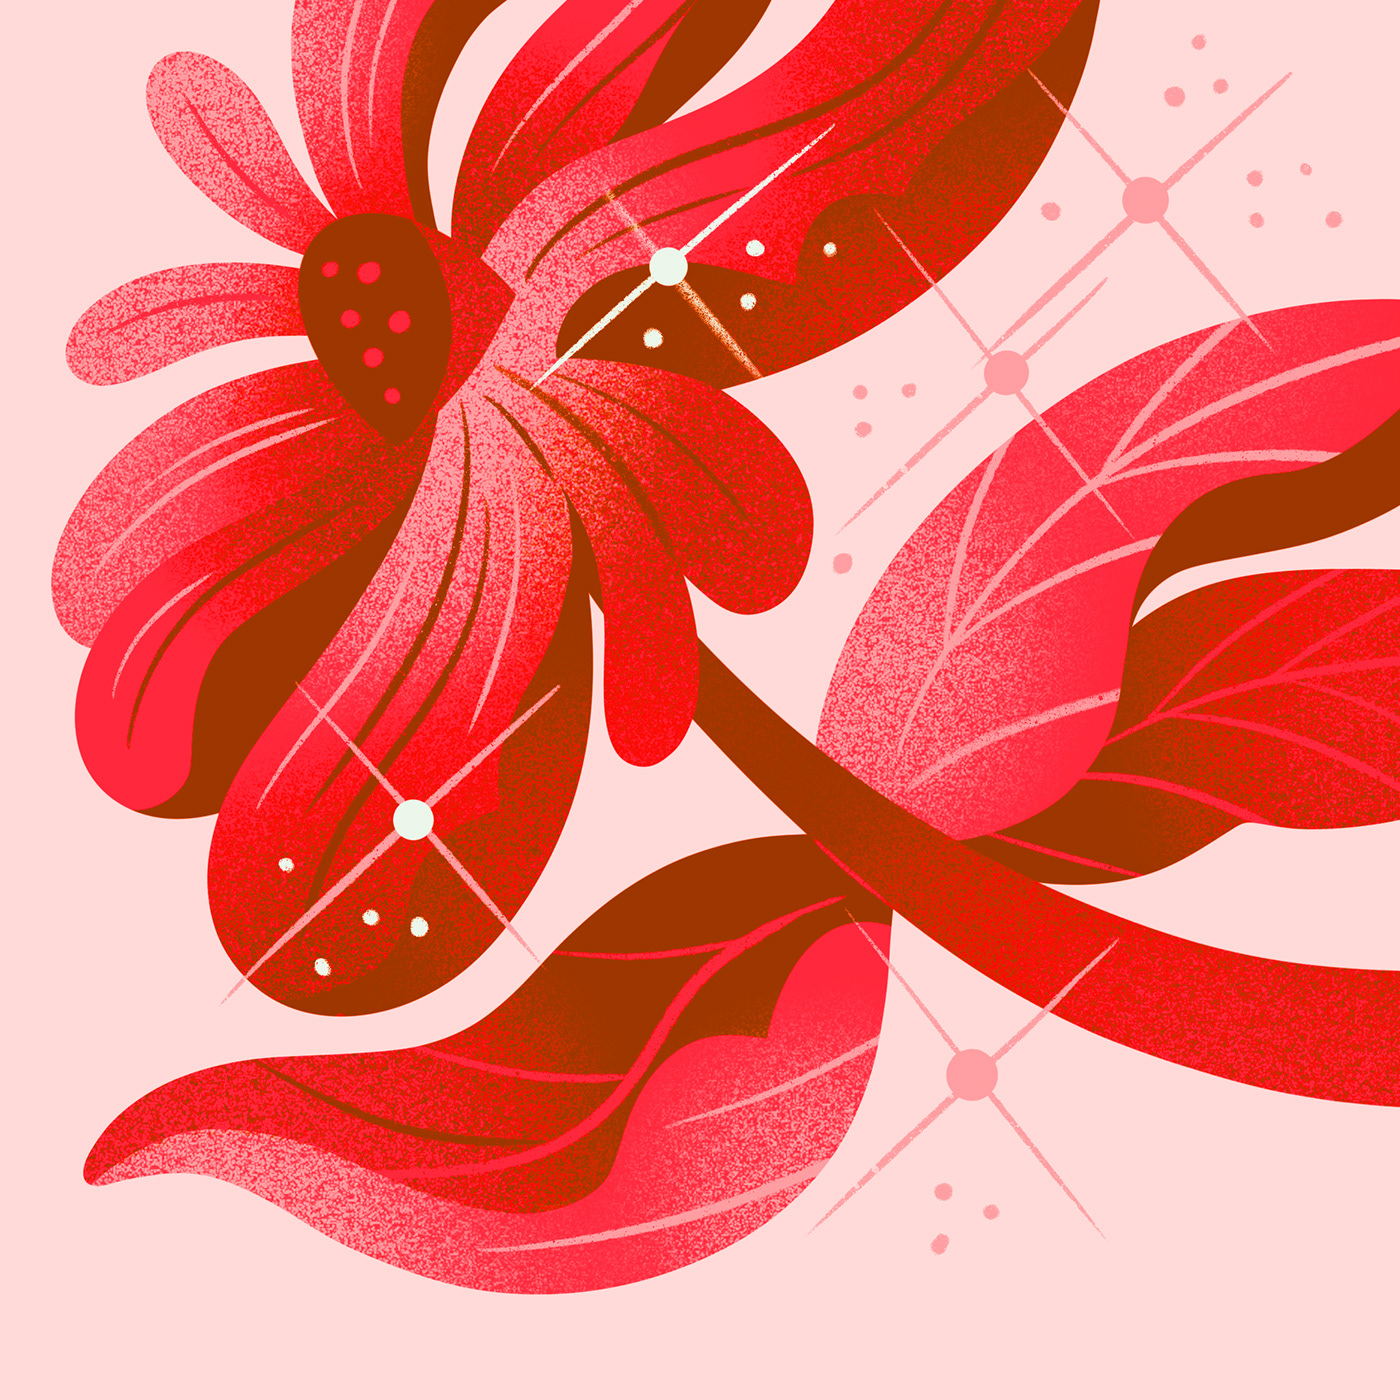 Illustration using noise texture of a spring blossom in monochromatic reds, surrounded by stars and 